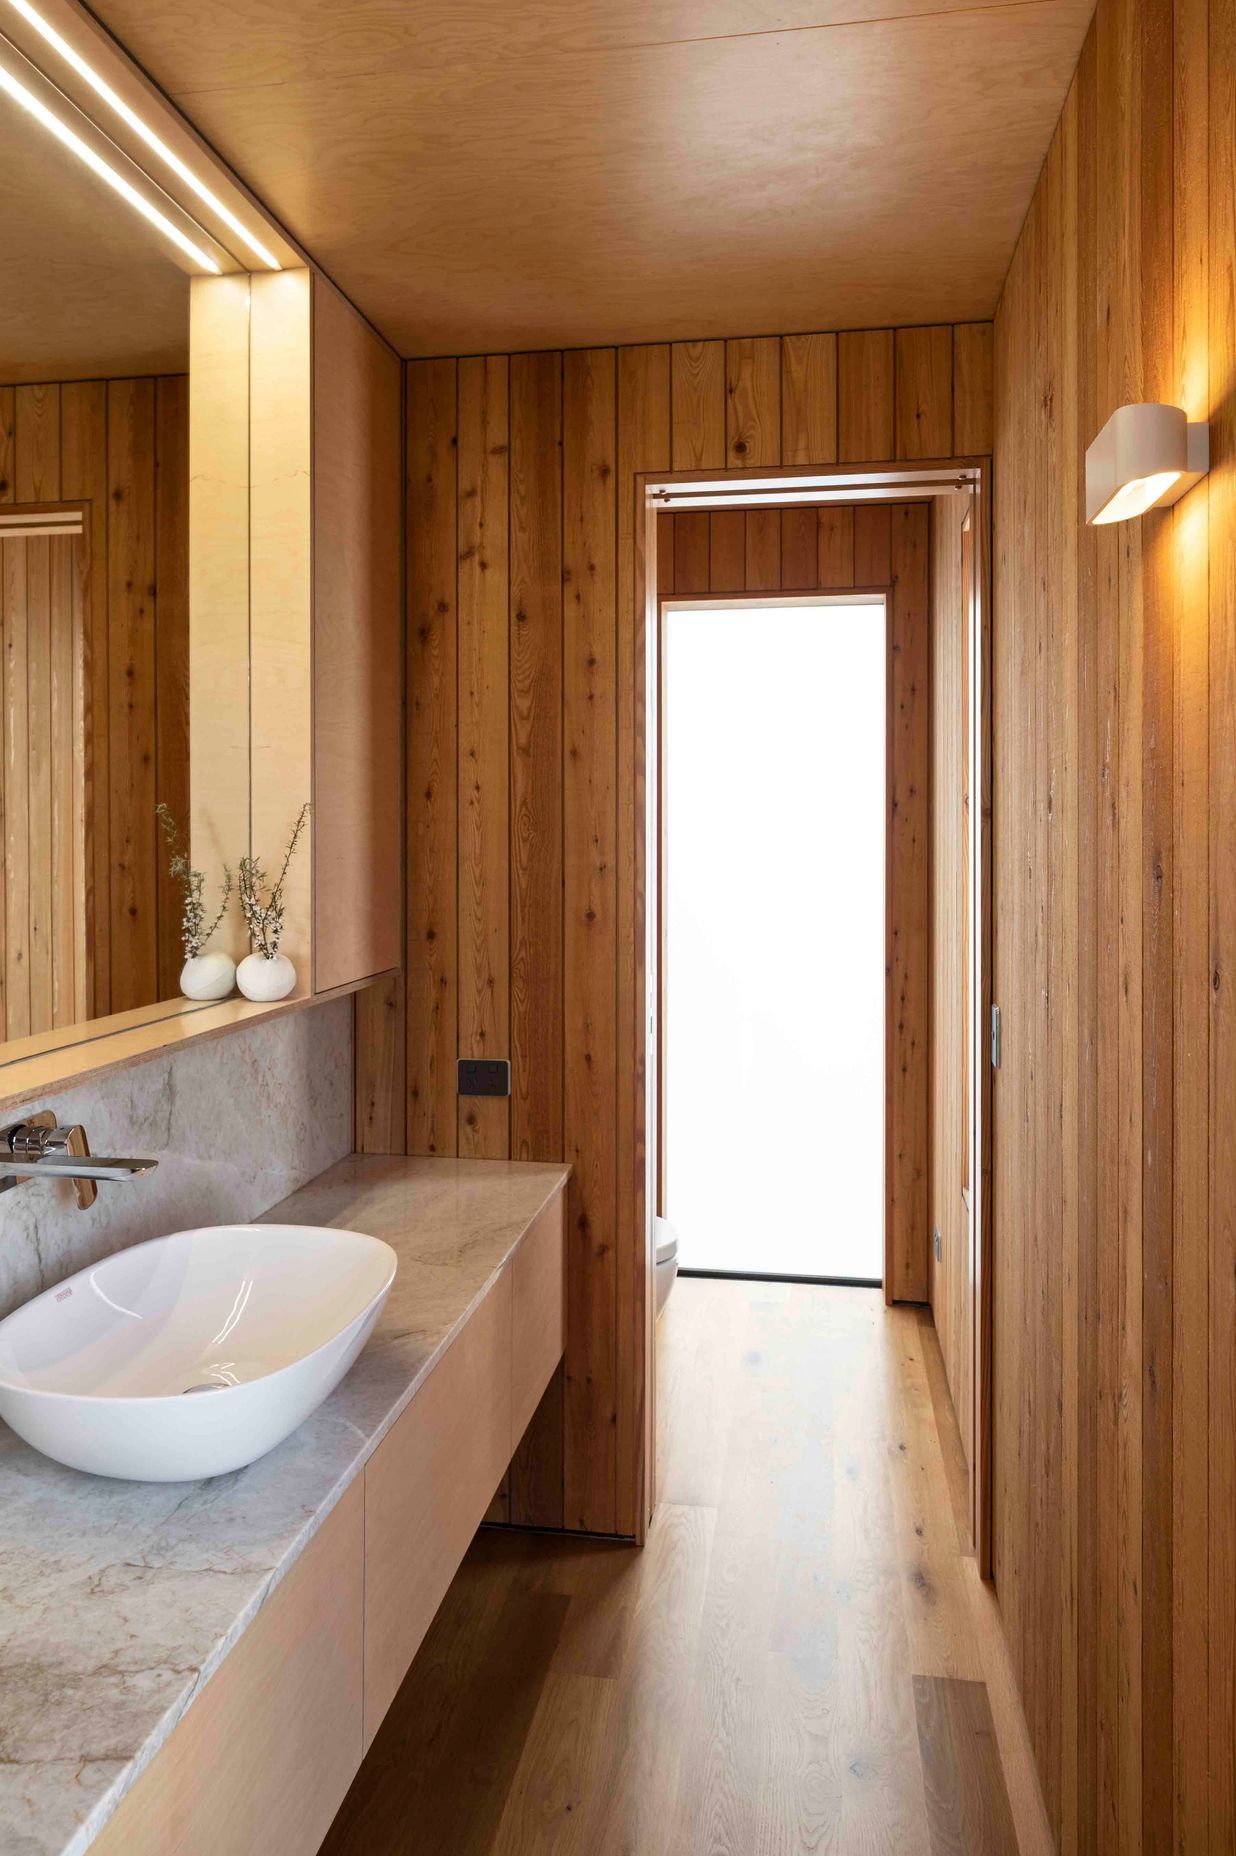 The bathroom's materiality ties easily into the biophilic theme of the house with Siberian larch walls, birch plywood ceilings and stone countertop.